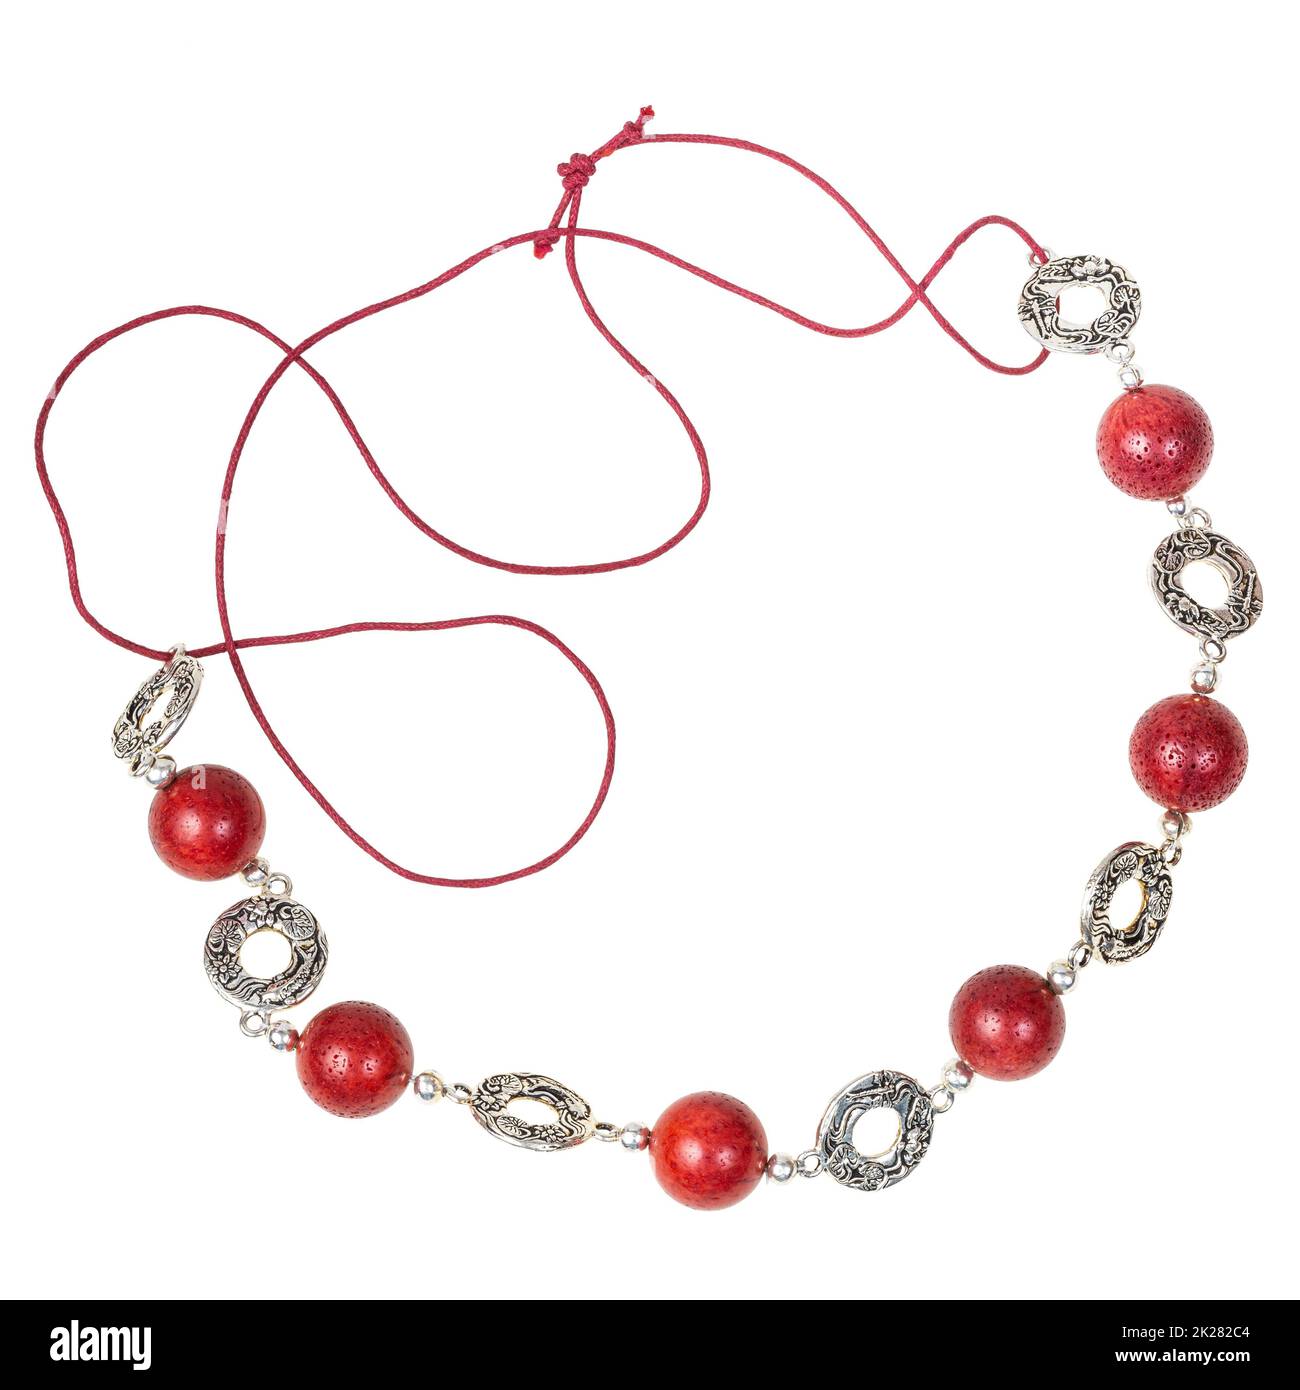 necklace of red coral balls on red leather cord Stock Photo